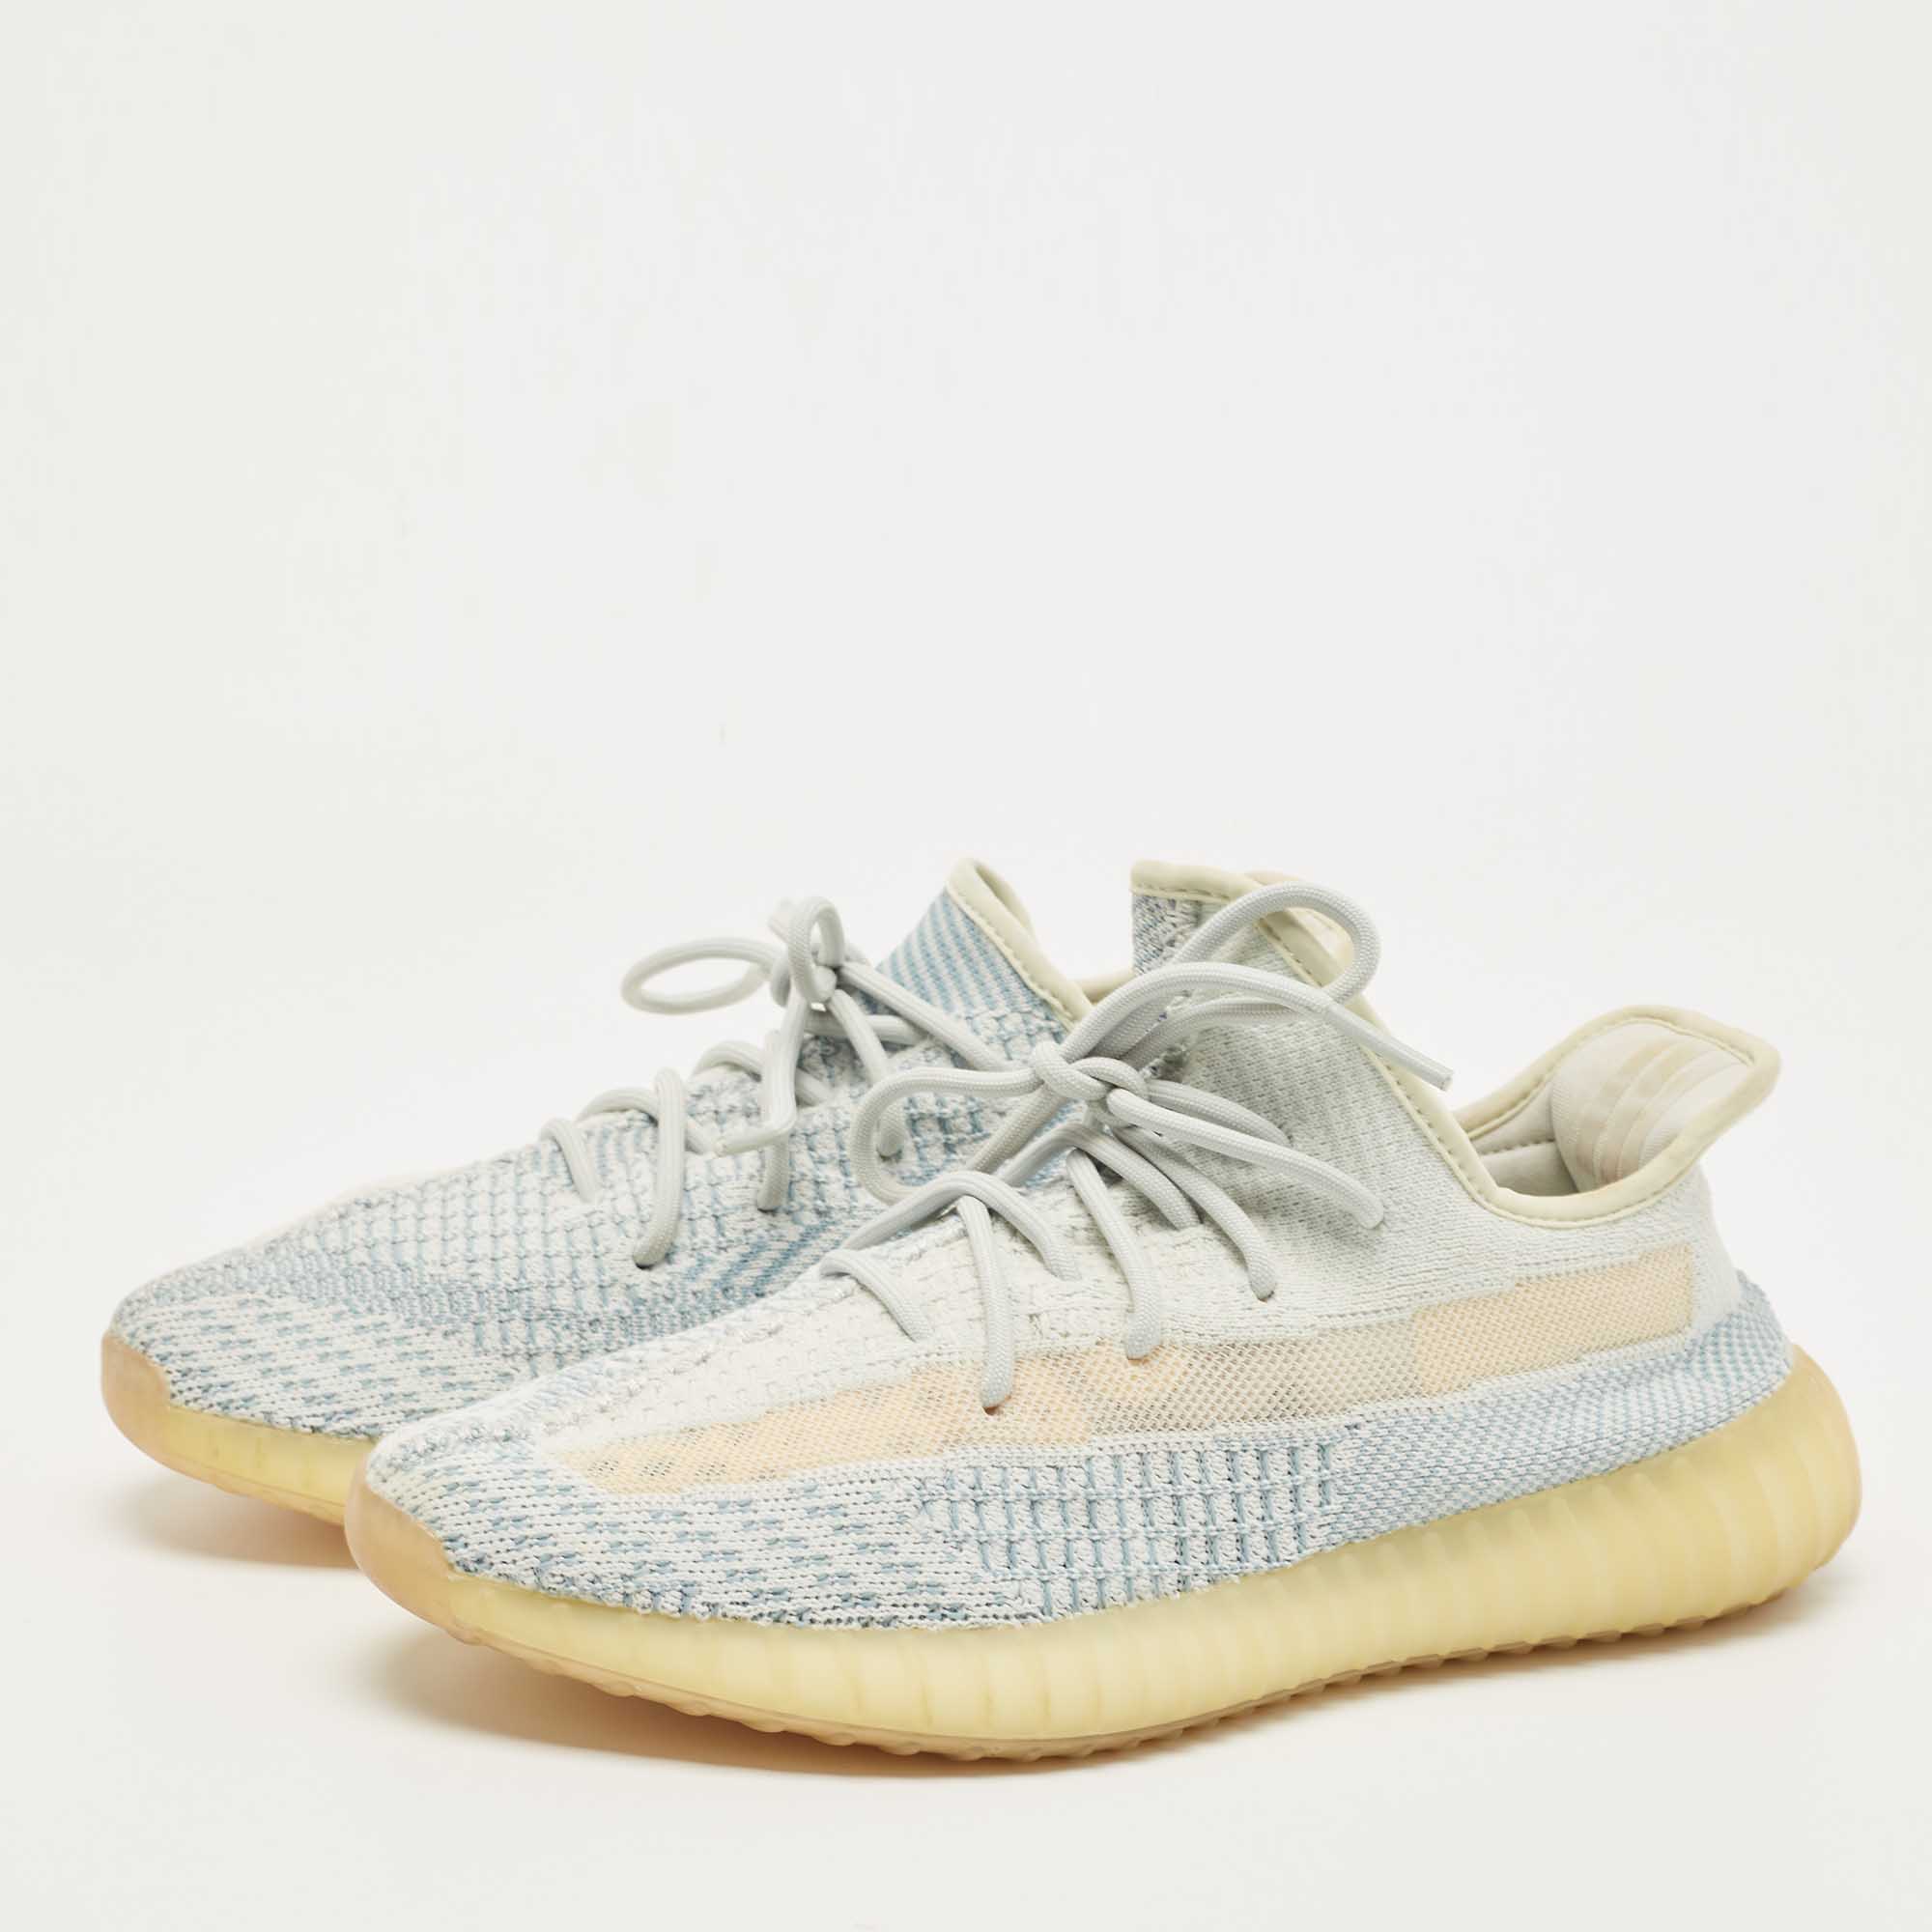 

Yeezy x Adidas Two Tone Knit Fabric Boost 350 V2 Cloud White Non Reflective Sneakers Size 42 2/3